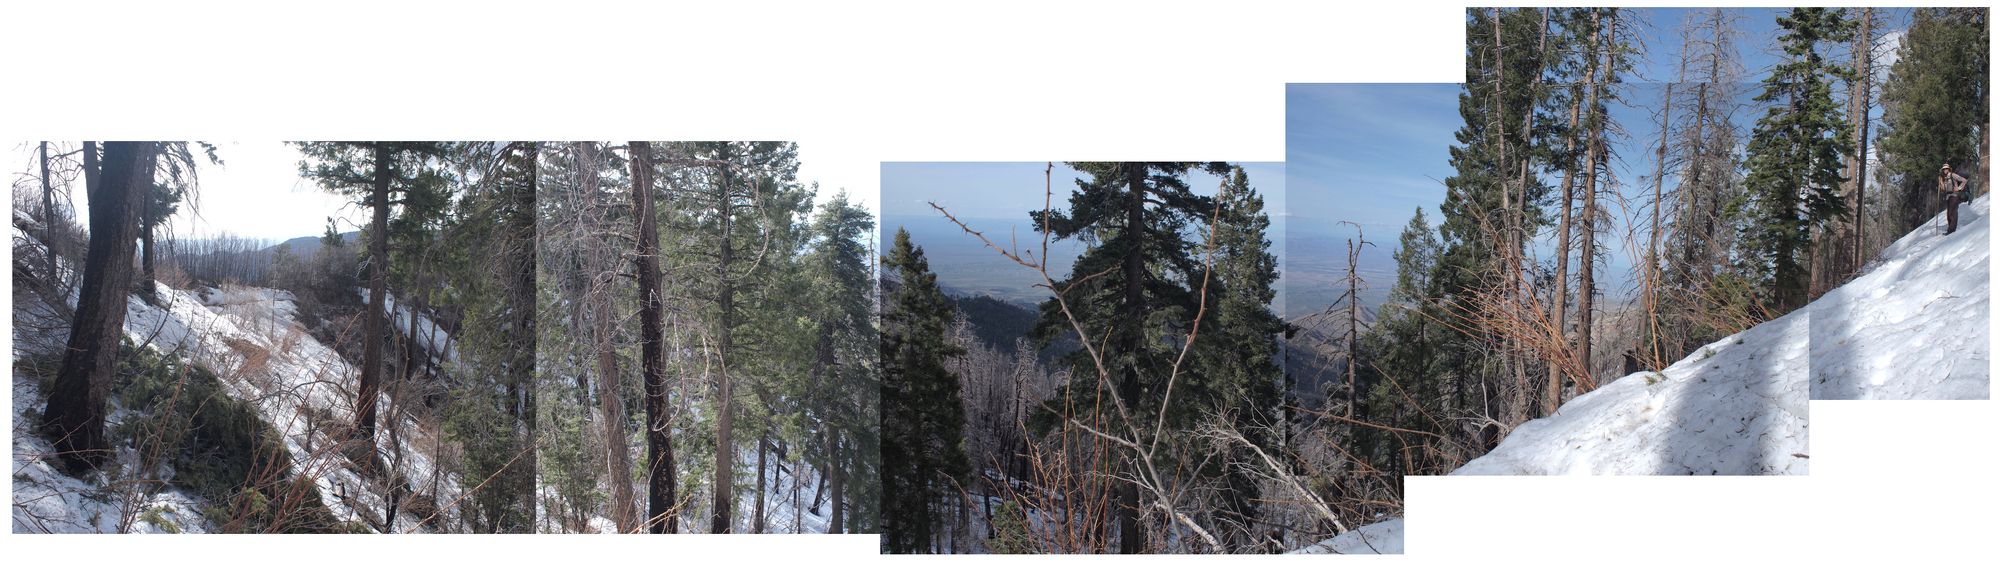 A panorama of photos taken from a pine covered, snowy mountaintop overlooking a valley